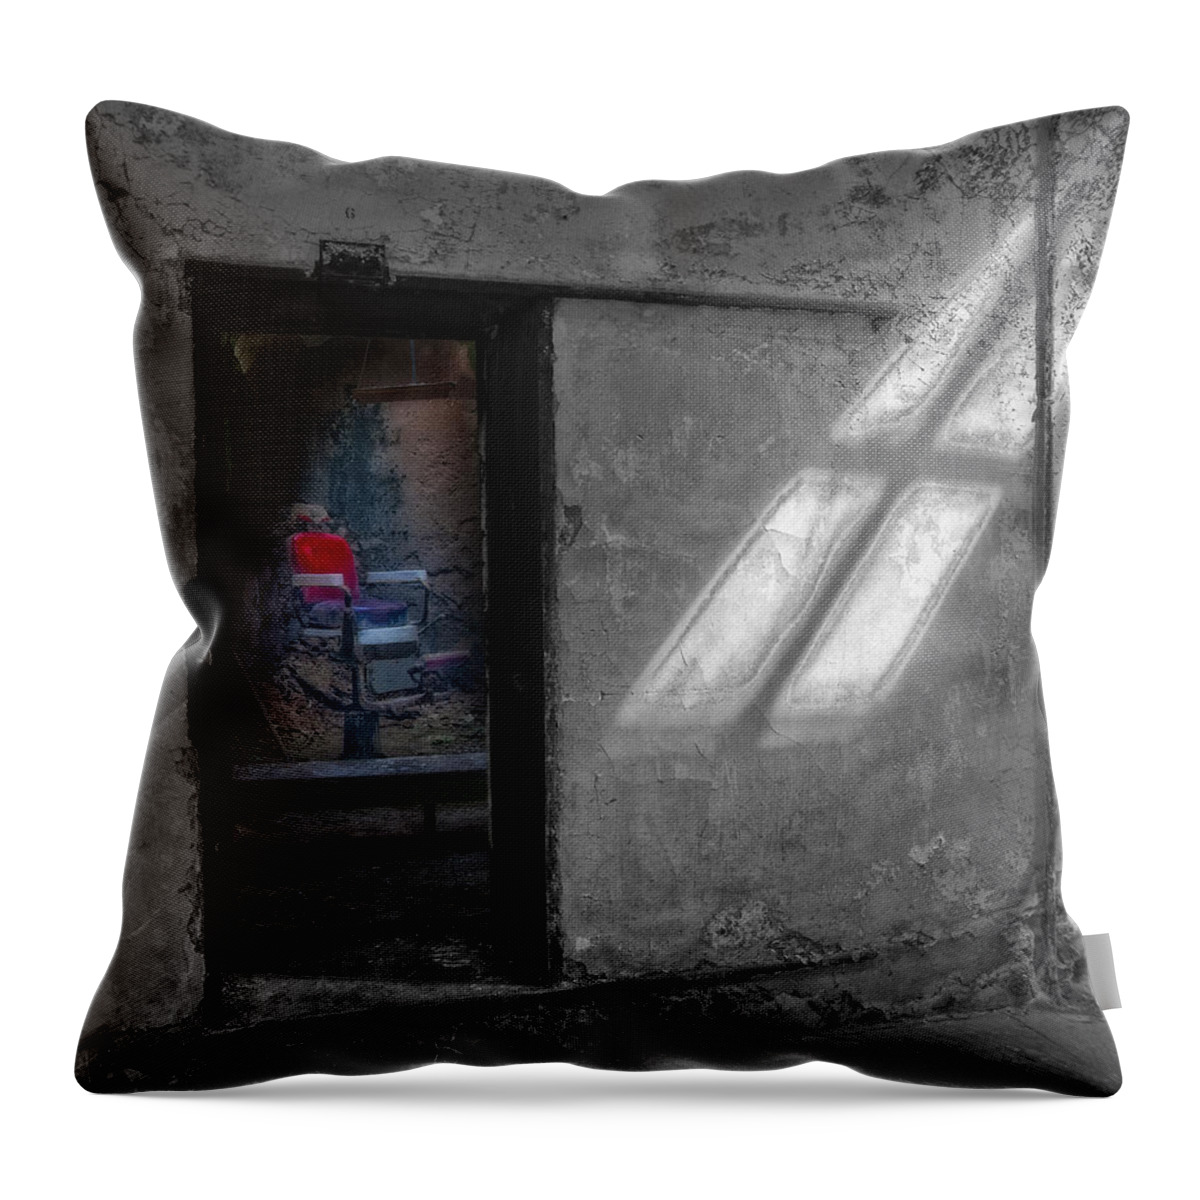 Barber Throw Pillow featuring the photograph Red Barber Chair by Susan Candelario